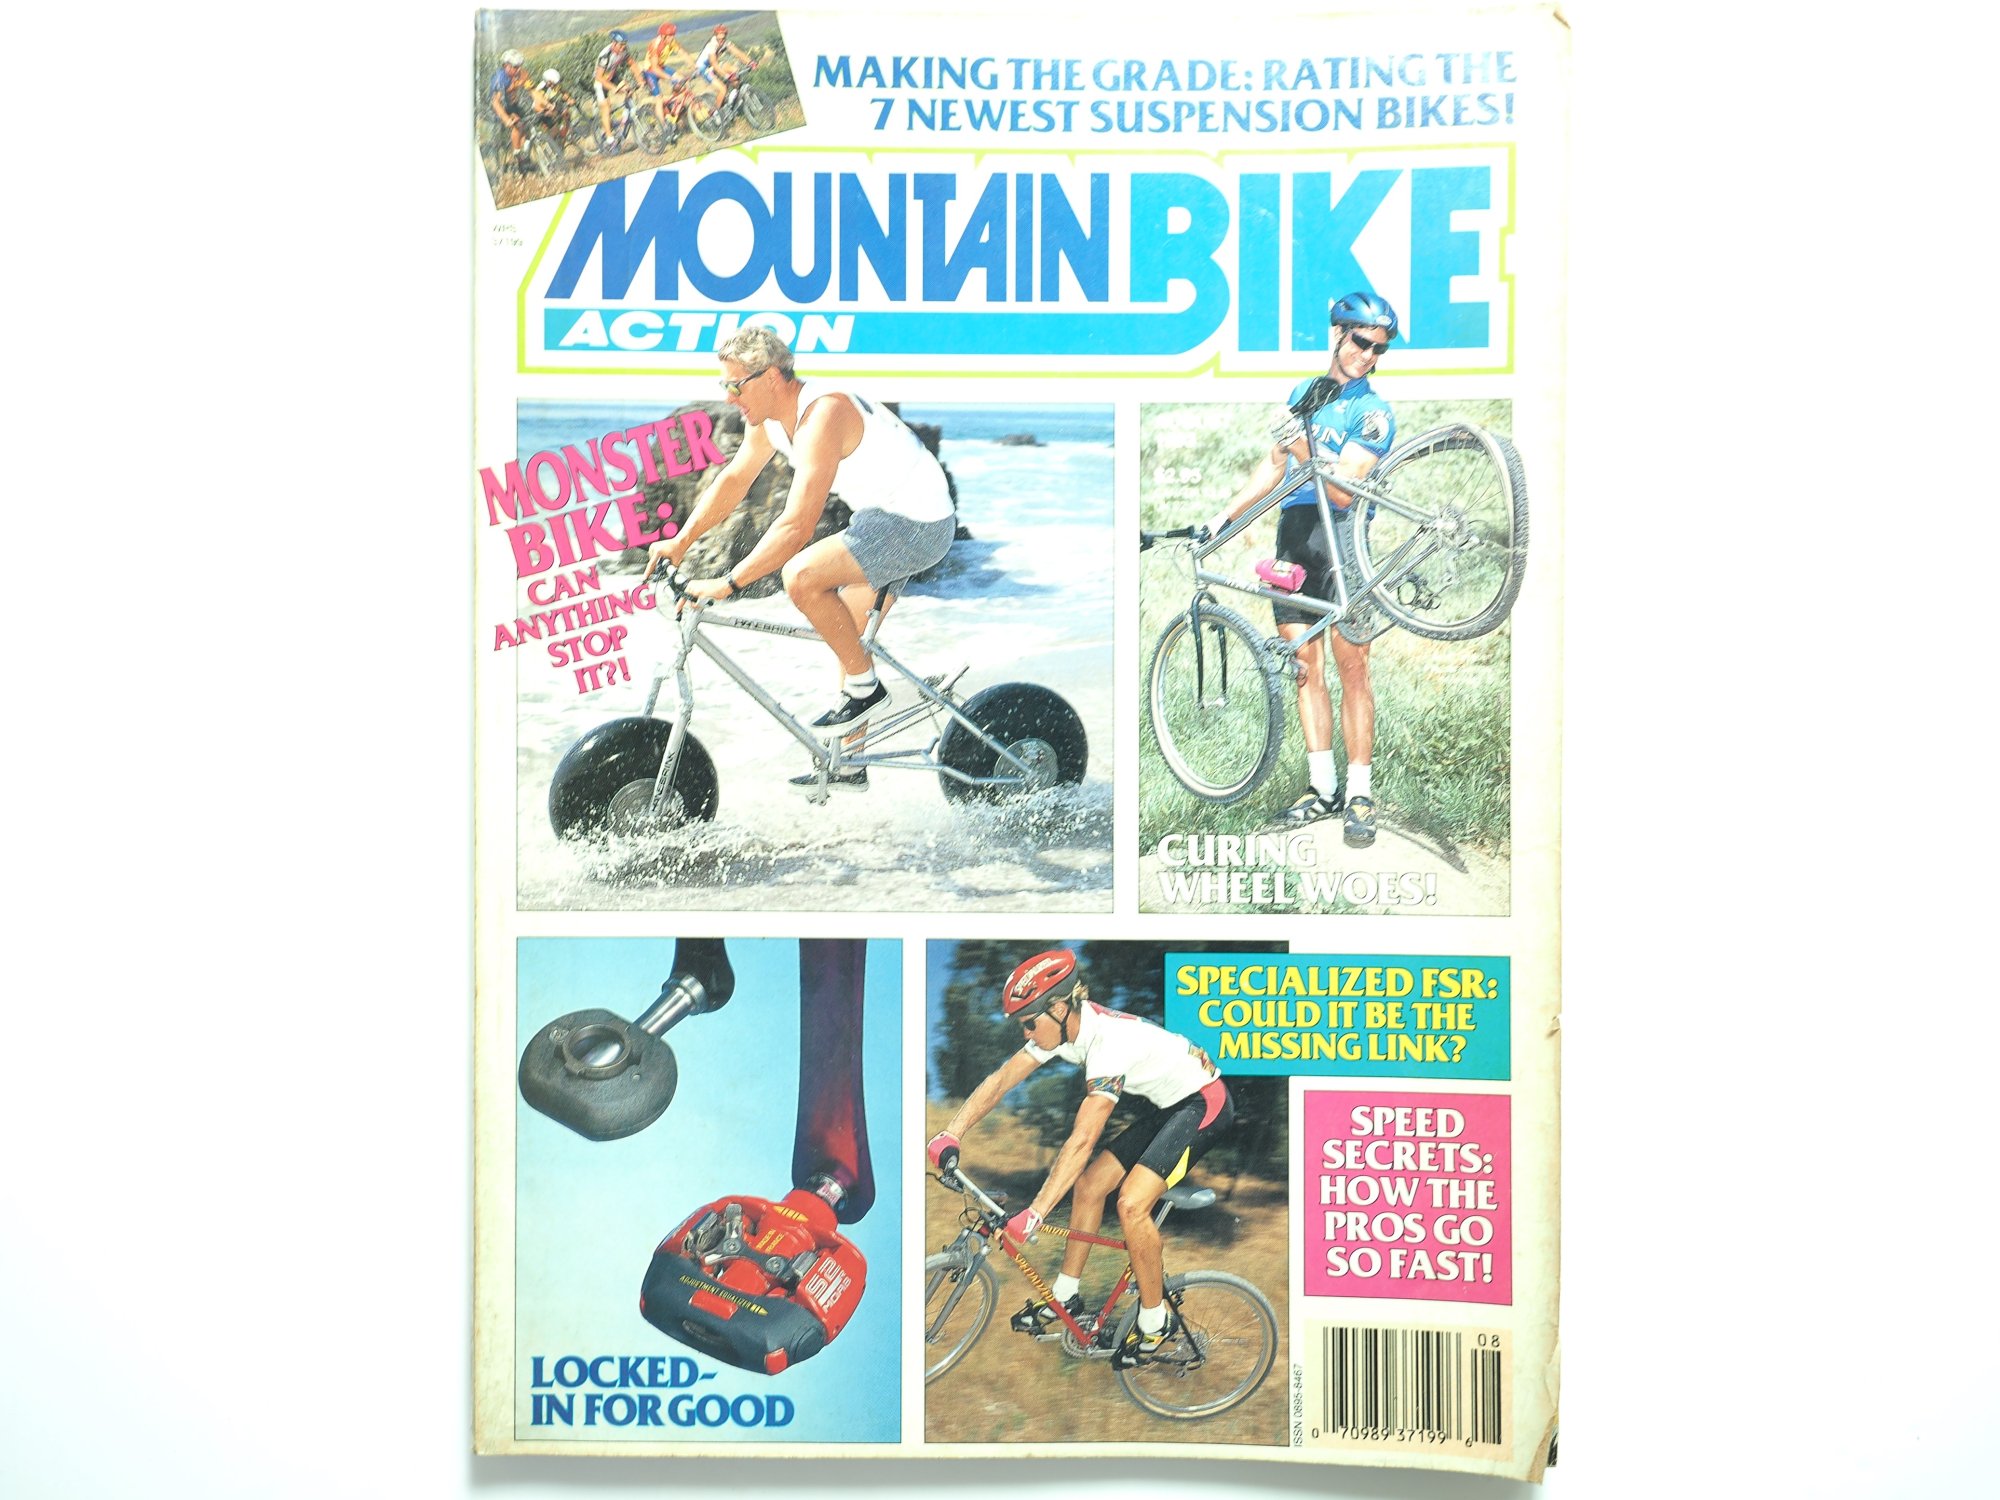 <img class='new_mark_img1' src='https://img.shop-pro.jp/img/new/icons13.gif' style='border:none;display:inline;margin:0px;padding:0px;width:auto;' />MOUNTAIN BIKE ACTION
1993(AUGUST)